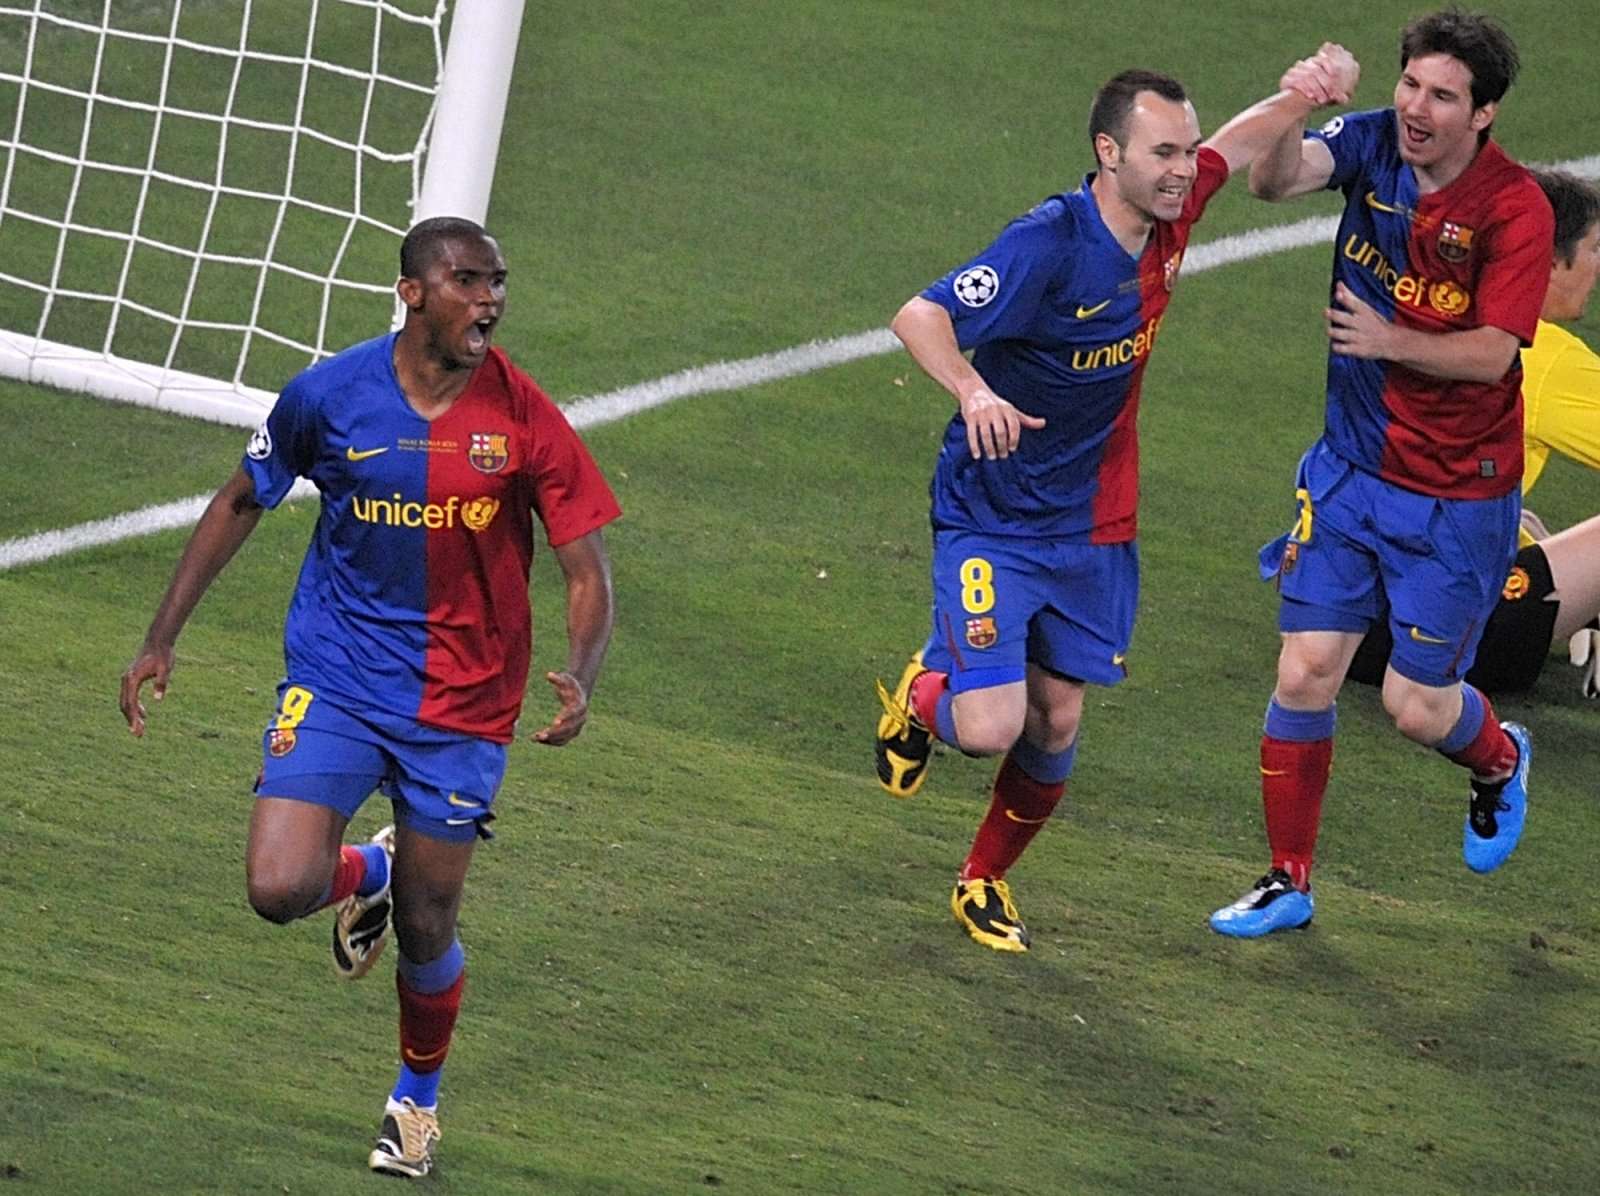 Eto'o, Messi and Iniesta during a game with Barca